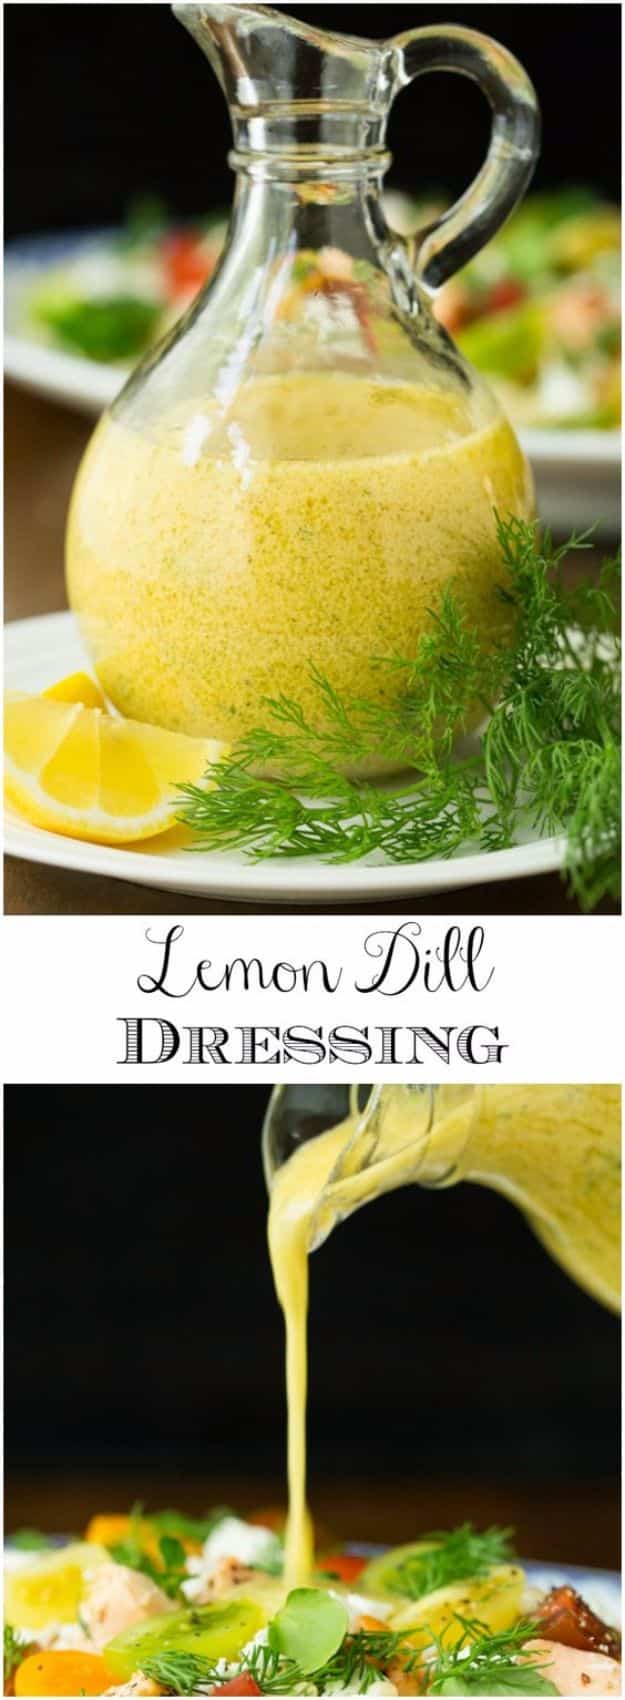 Salad Dressing Recipes - Lemon Dill Dressing - Healthy, Low Calorie and Easy Recipes for Creamy Homeade Dressings - How To Make Vinaigrette, Mango, Greek, Paleo, Balsamic, Ranch, and Italian Copycat Dressings 